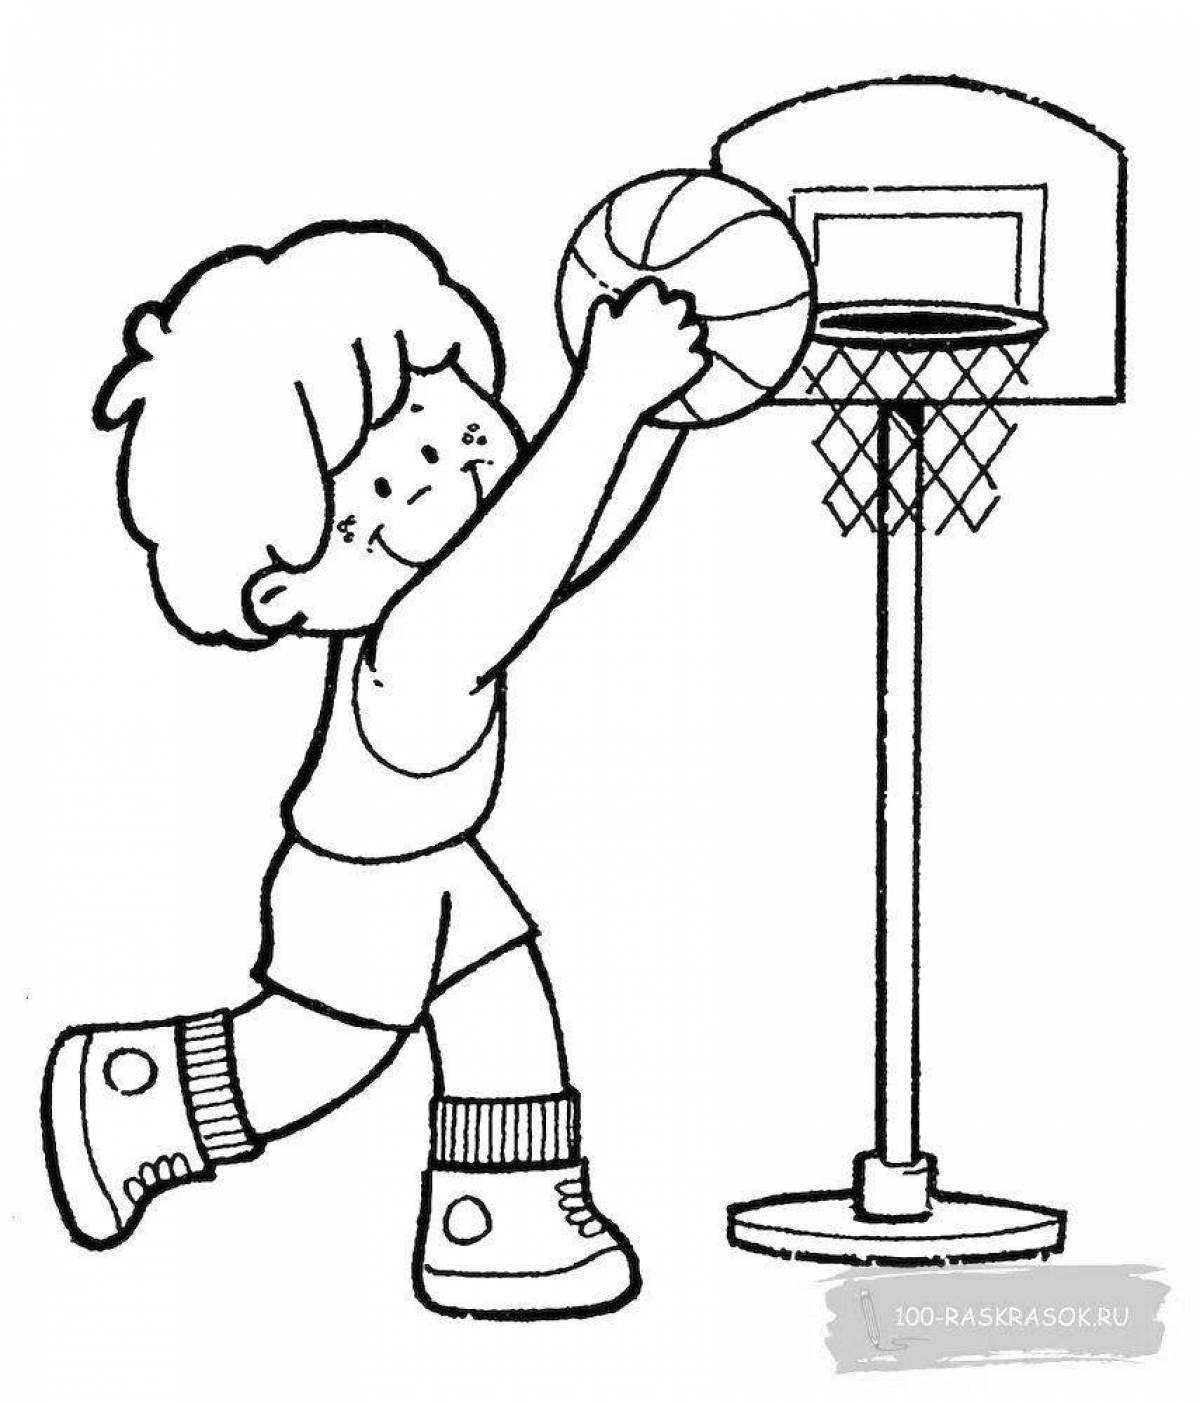 Amazing sports coloring book for 3-4 year olds